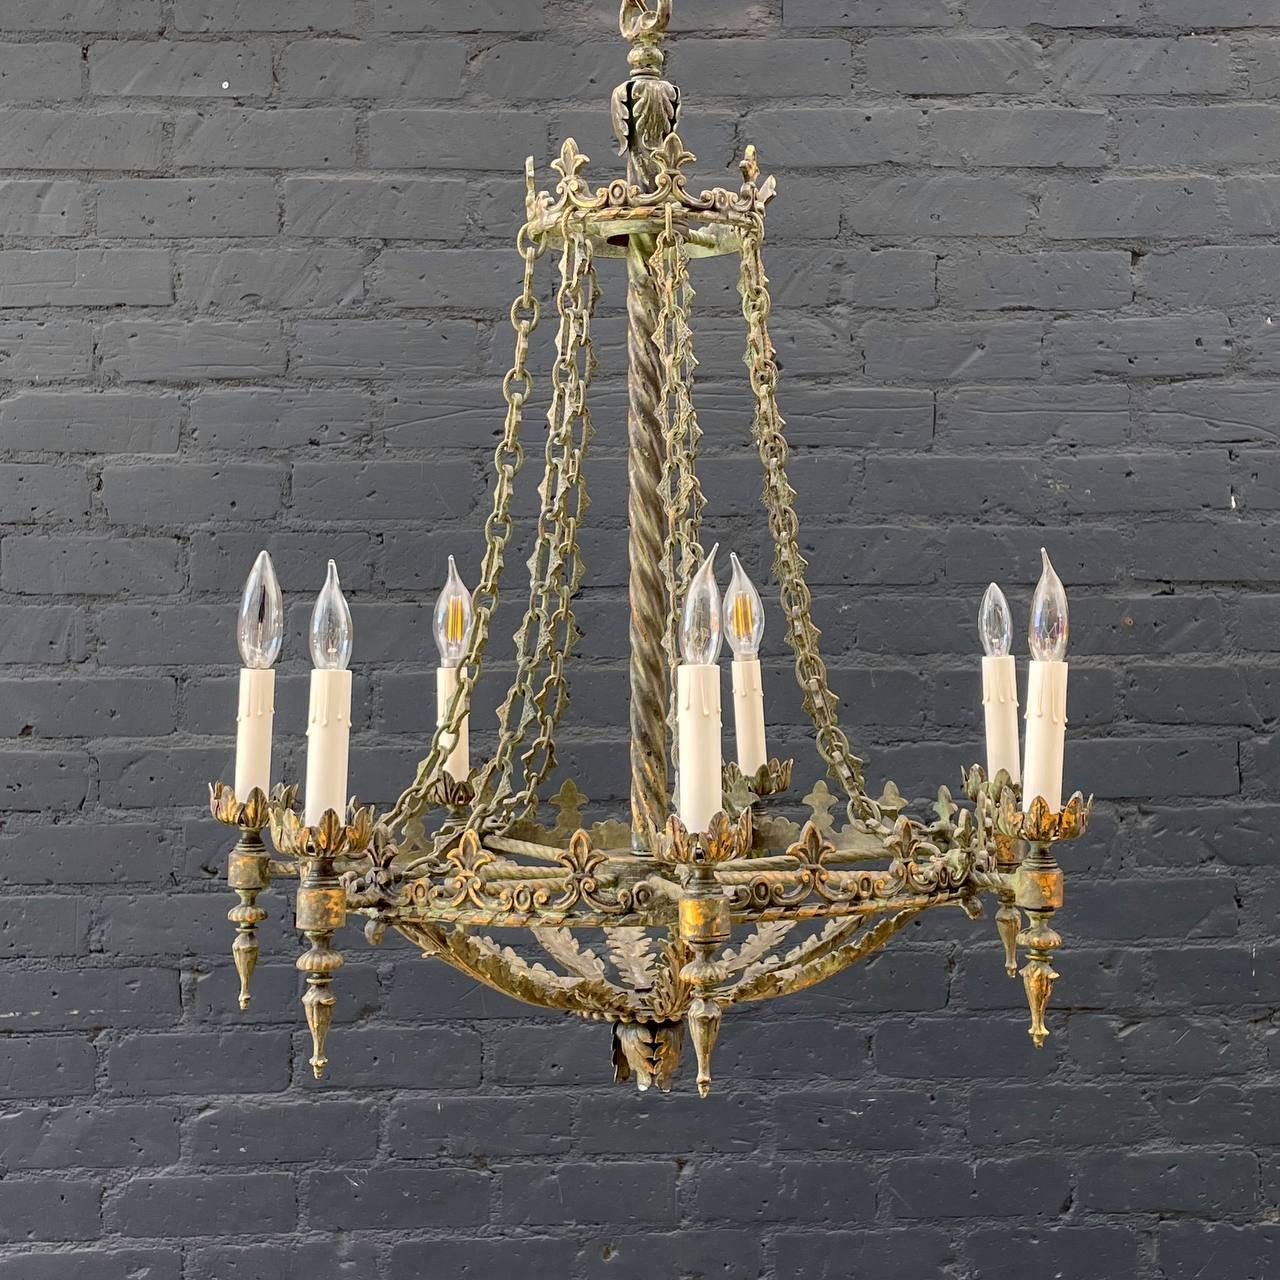 Antique French Gilt Metal Chandelier

Country: France  
Materials: Gilt Metal
Condition: Shows Patina From Age 
Style: French Gothic
Year: 1950’s

$1,895

Dimensions:
30”H x 24”W x 24”D